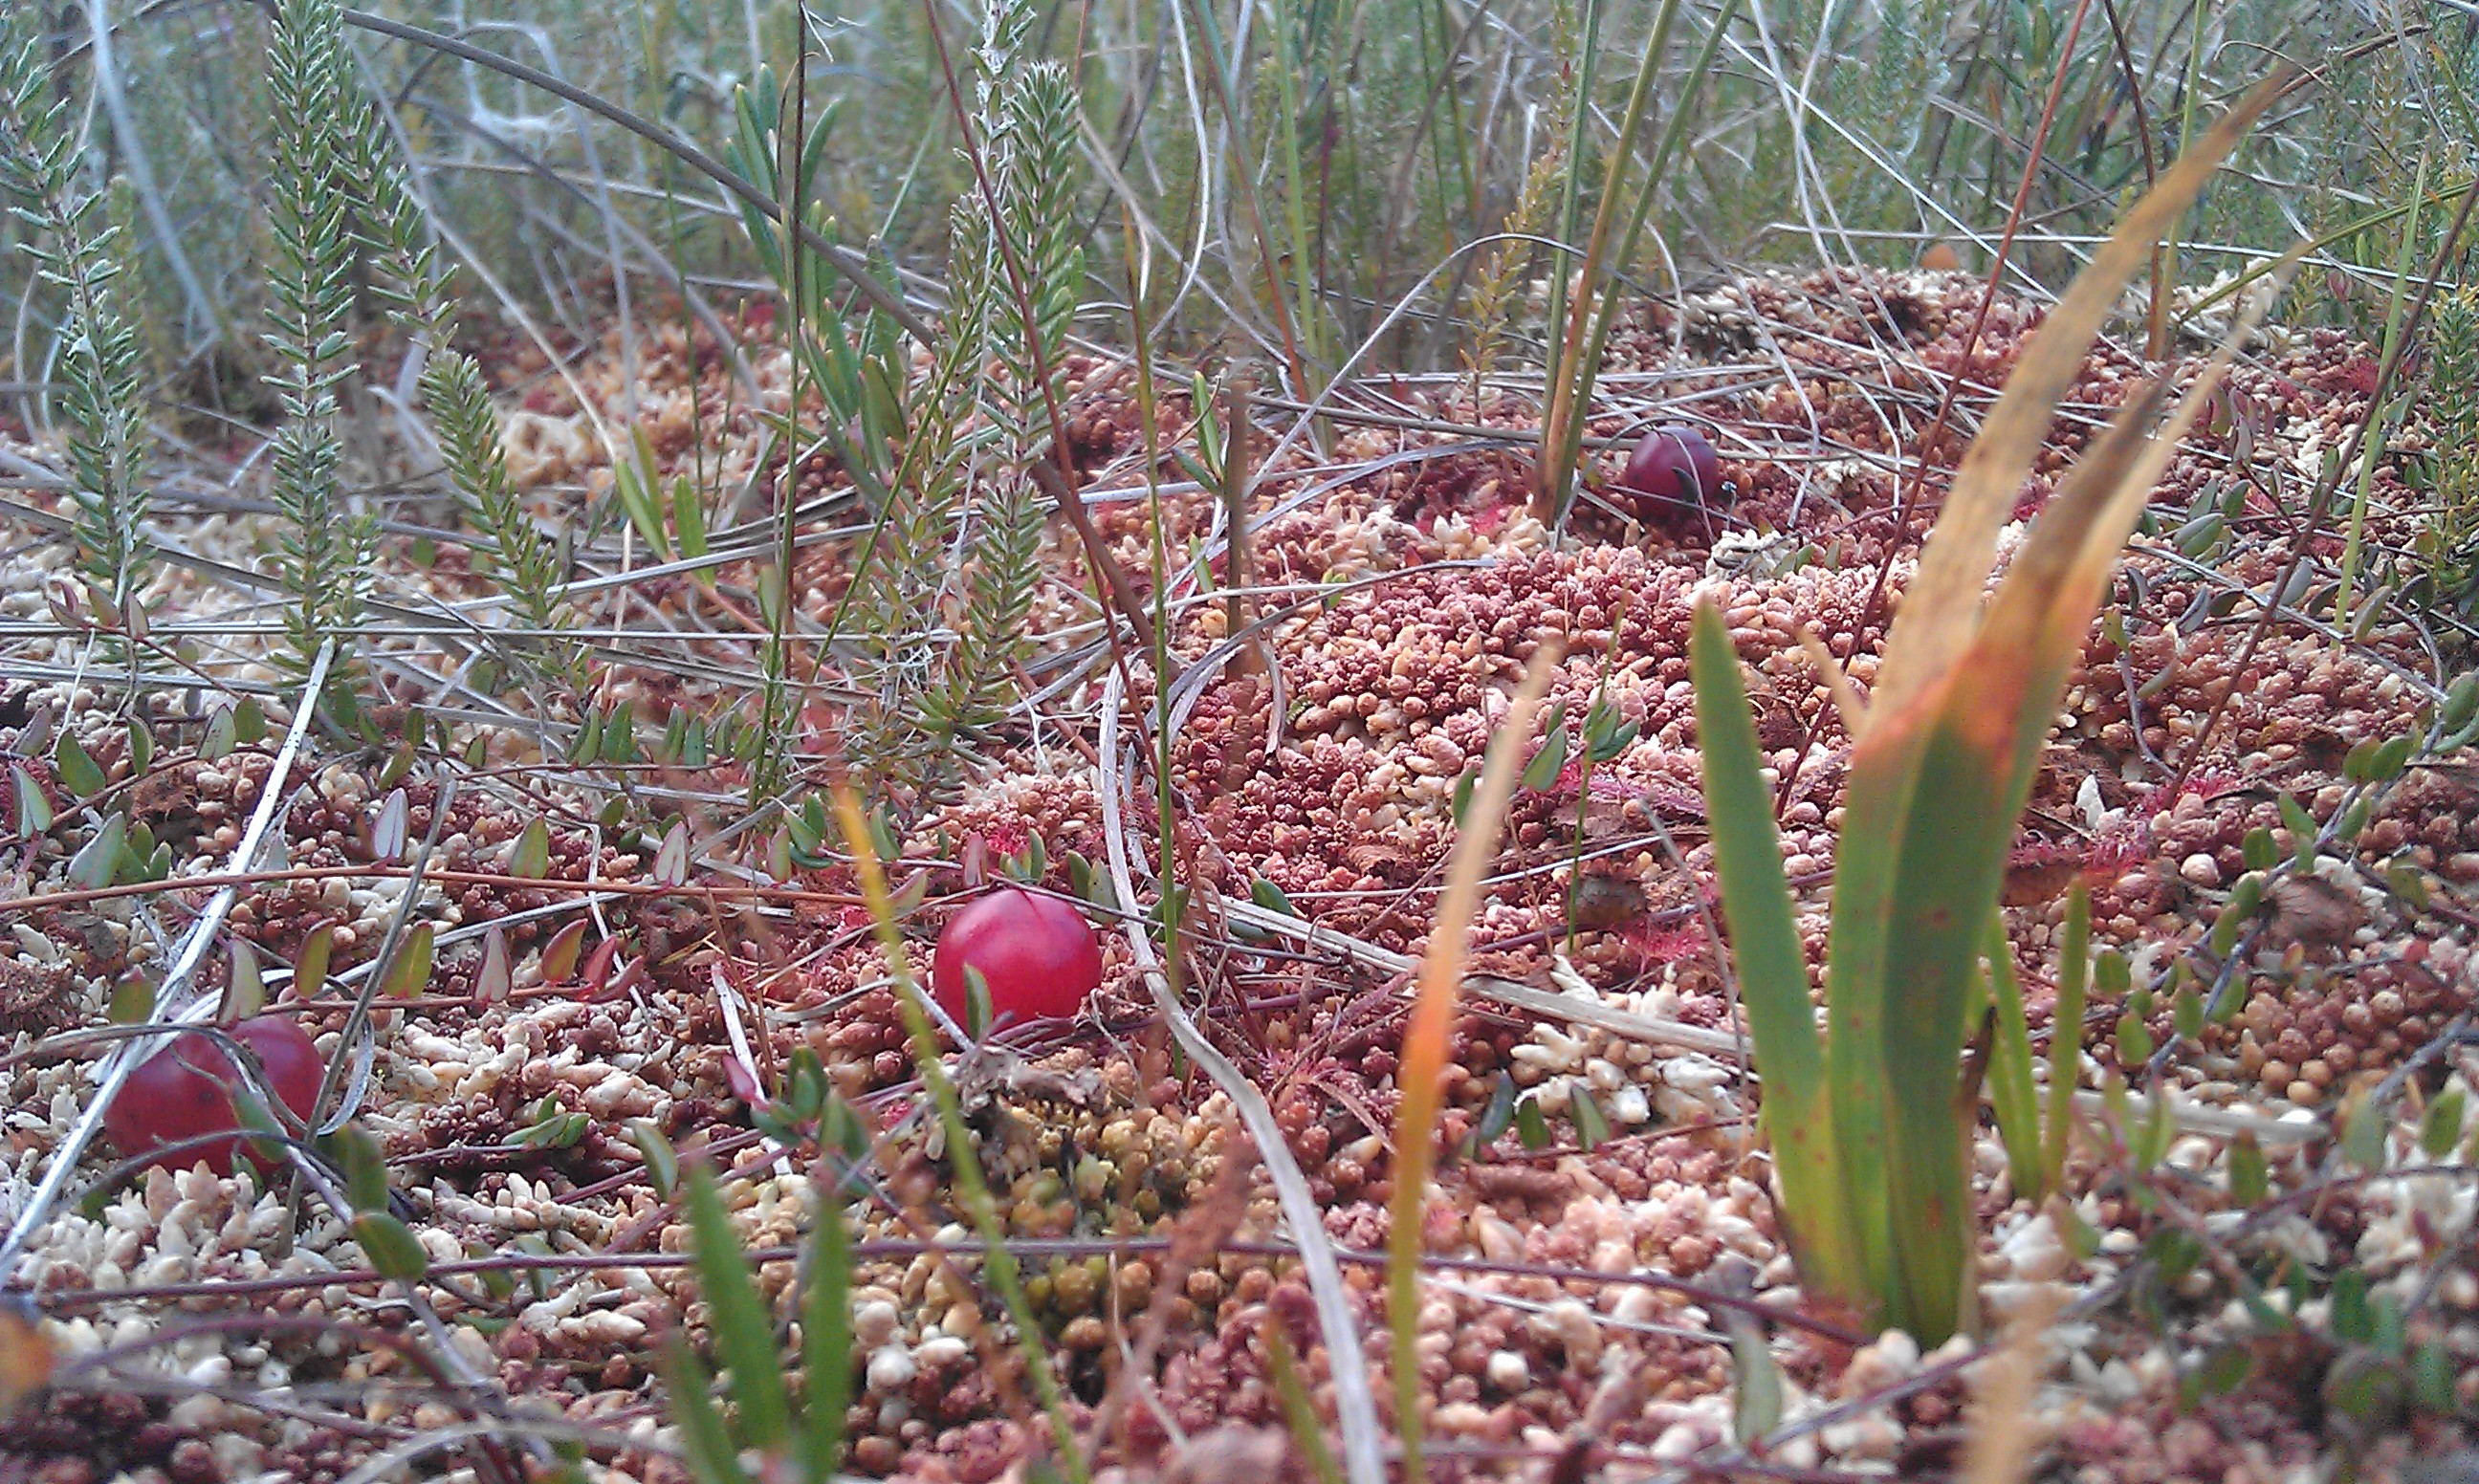 Bog Cranberry in Mosses and Grasses